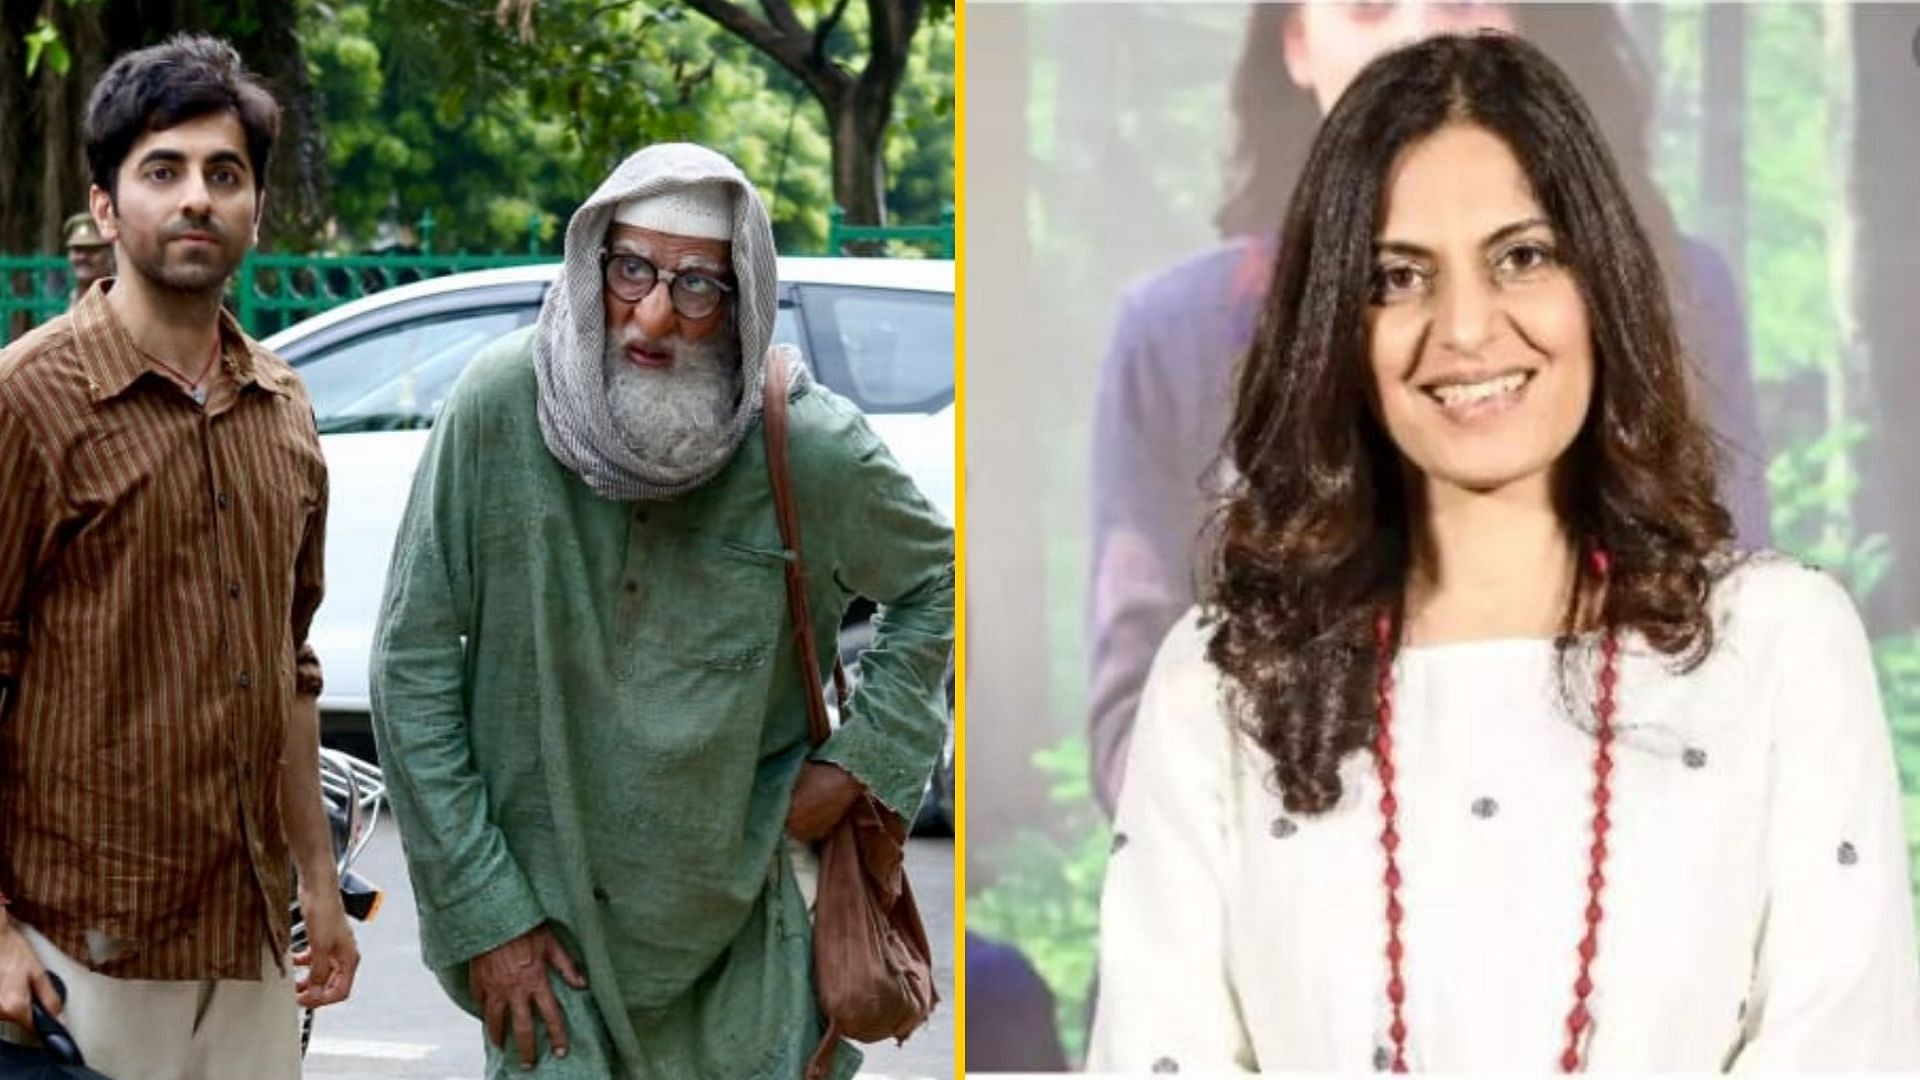 The makers of <i>Gulabo Sitabo </i>react to plagiarism allegations on writer Juhi Chaturvedi.